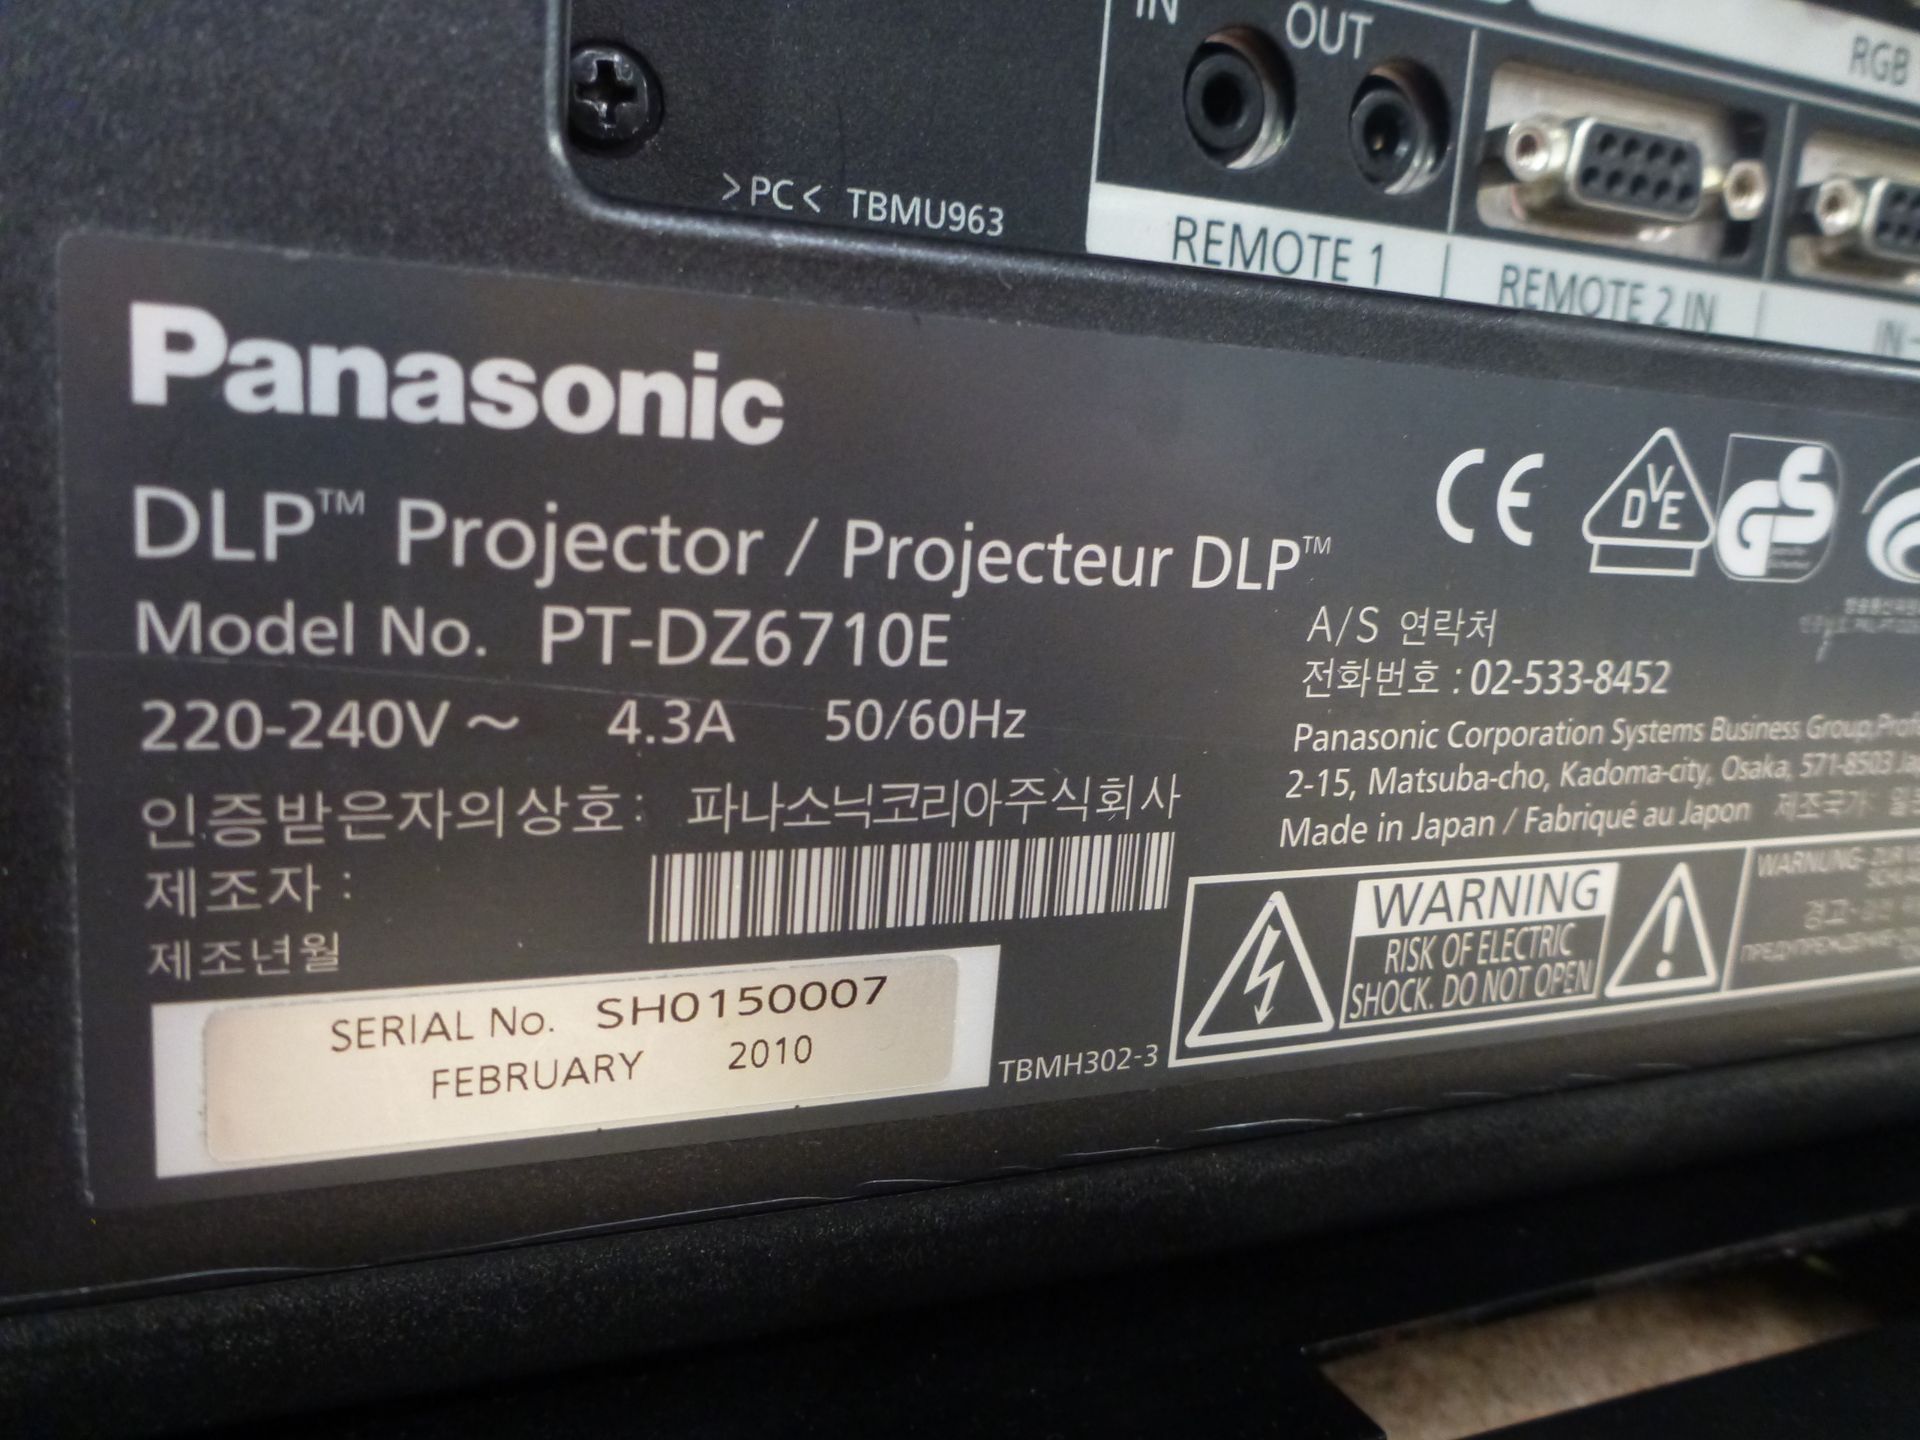 Panasonic Projector, Model PT-DZ6710E, S/N SH0150007, YOM 2010, In flight case with standard 1.3-1. - Image 6 of 13